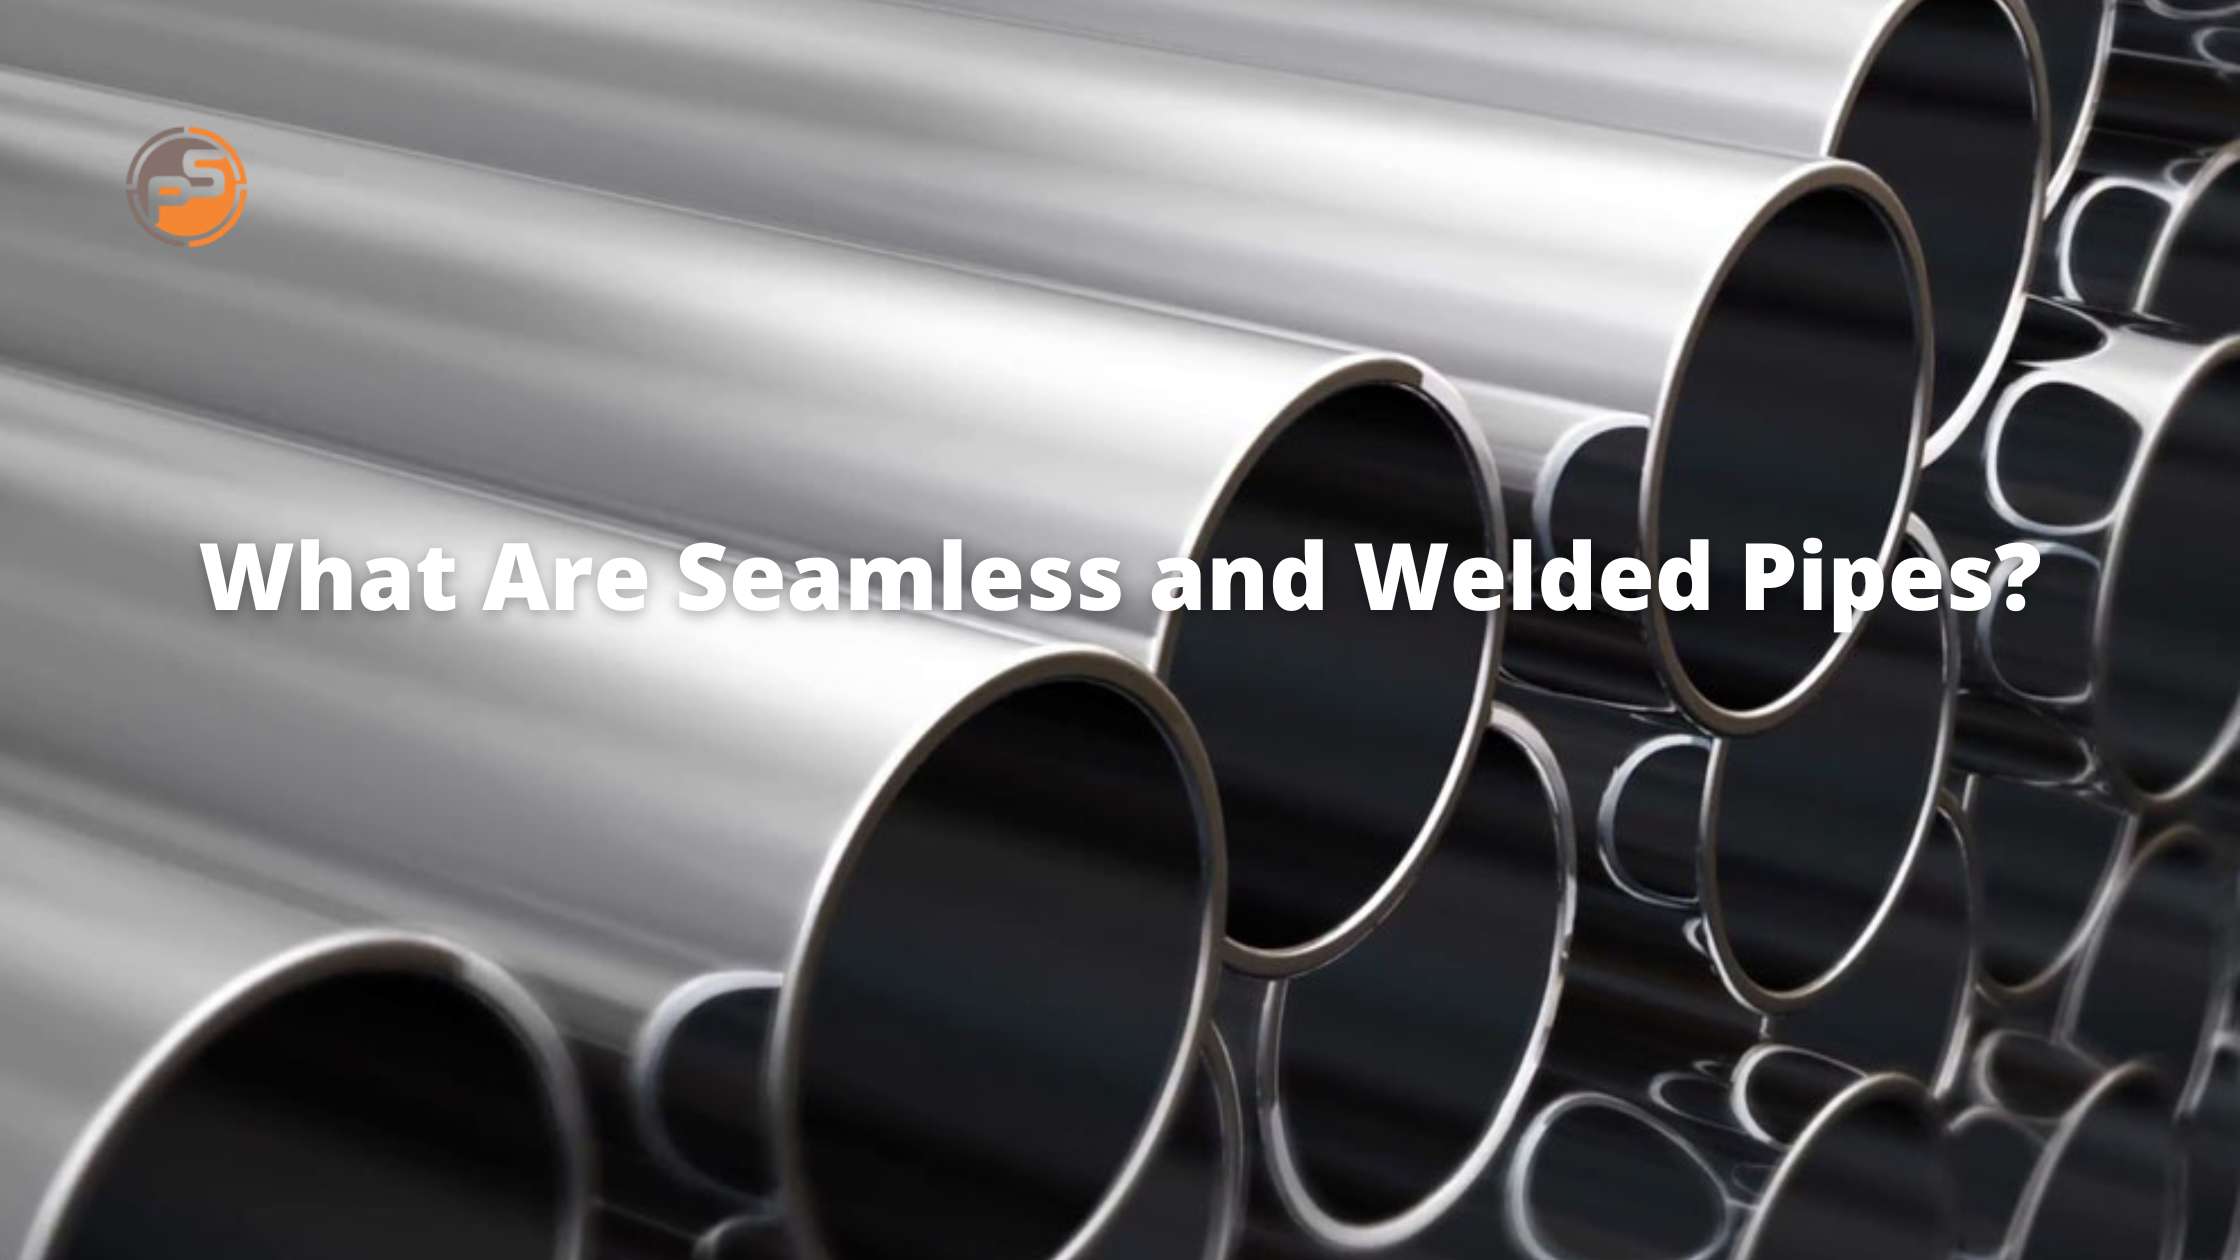 What Are Seamless and Welded Pipes?